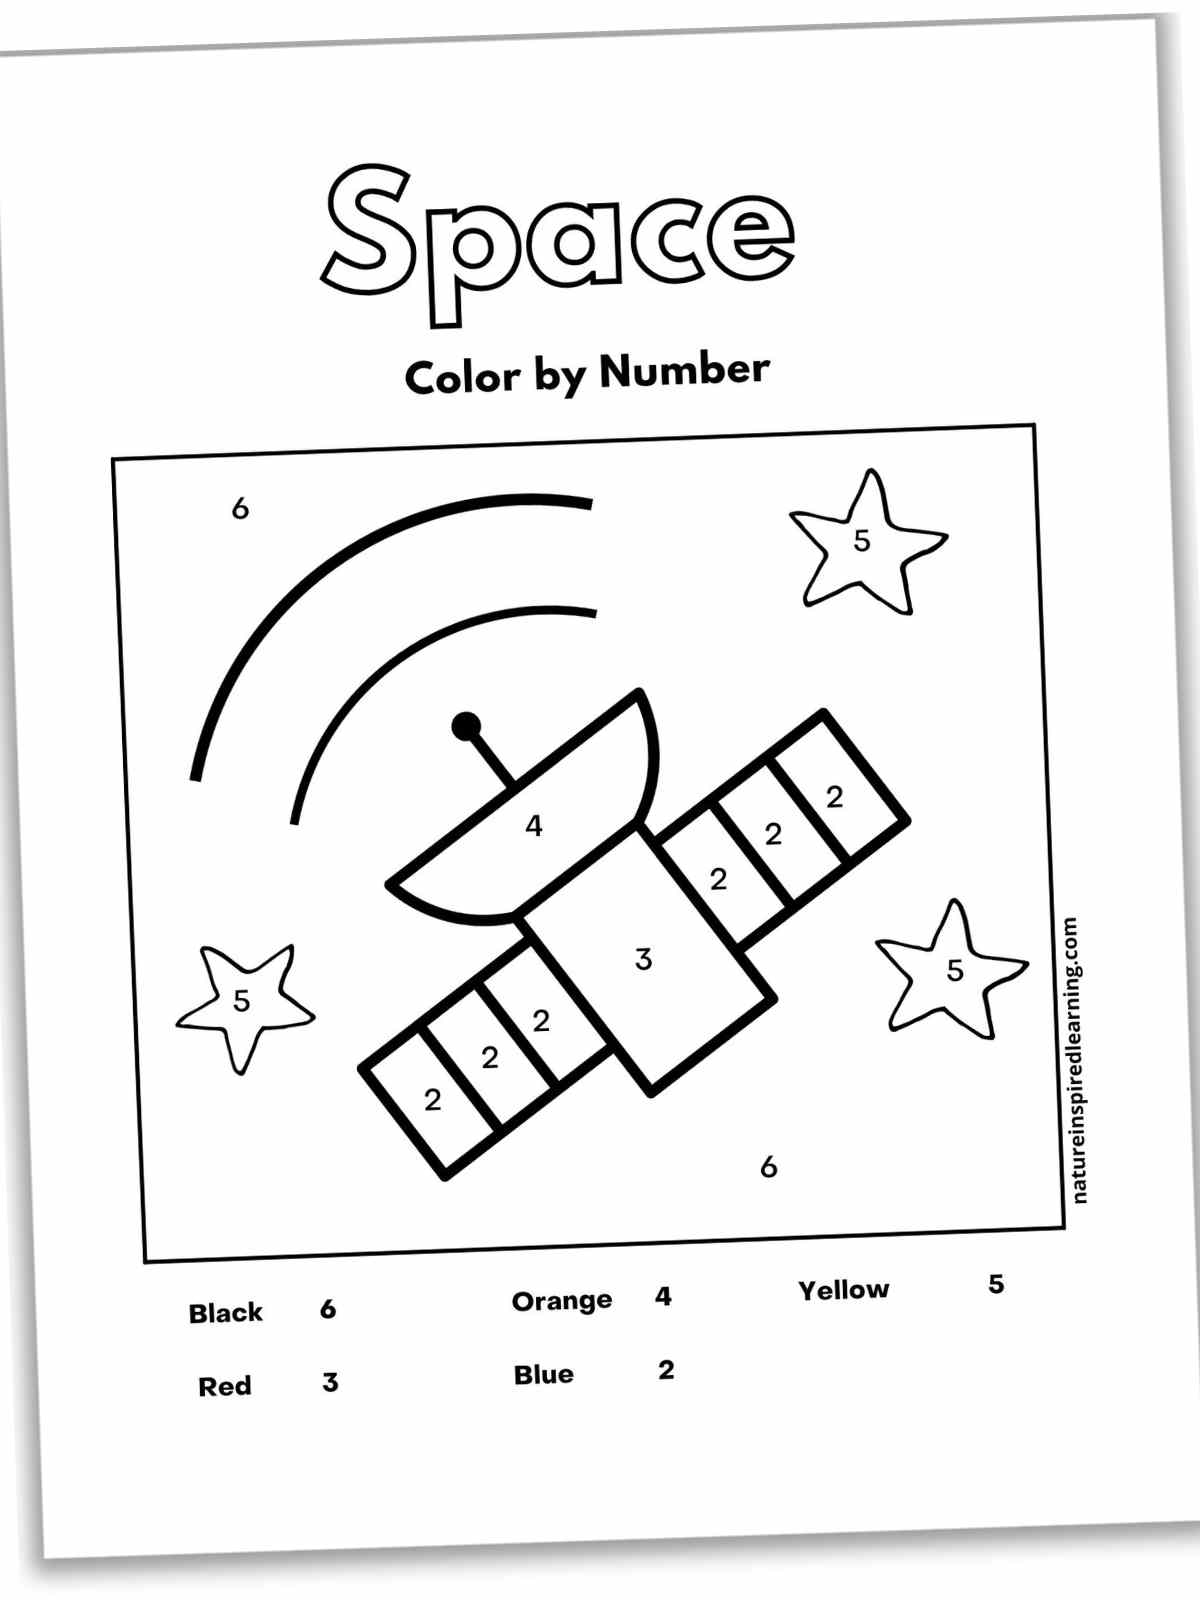 Black and white worksheet with Space written in outline form above the outline of a satellite in space with stars. Number key at the bottom with numbers within the image.